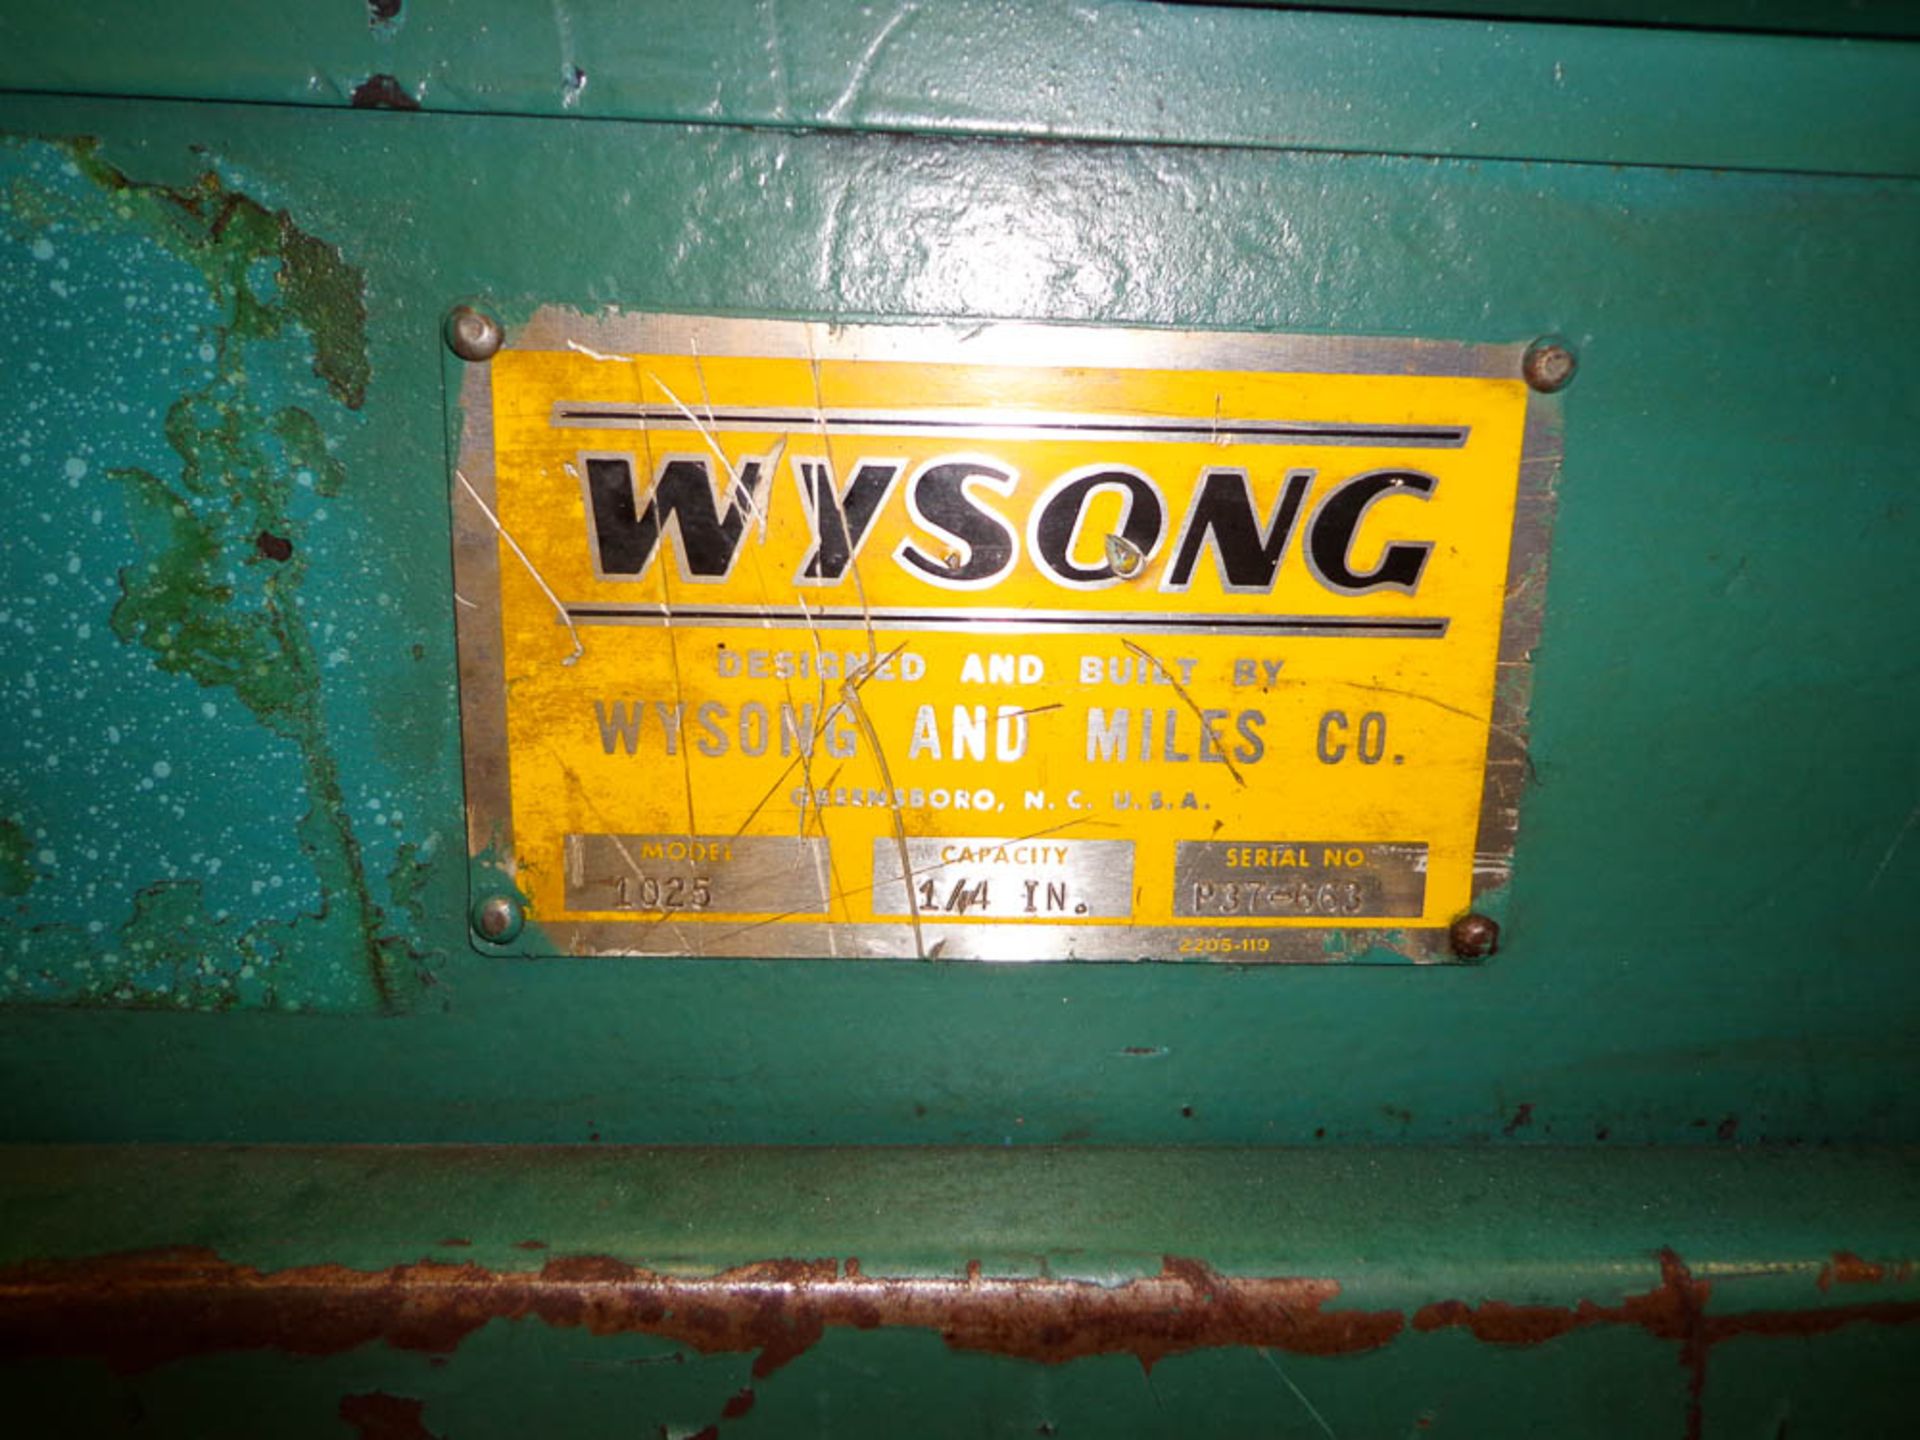 WYSONG MDL. 1025 10' SHEAR, 1/4'' CAPACITY, 9'-3'' SQUARING ARM, PUSH BUTTON, FOOT PEDAL CONTROLS, - Image 2 of 5